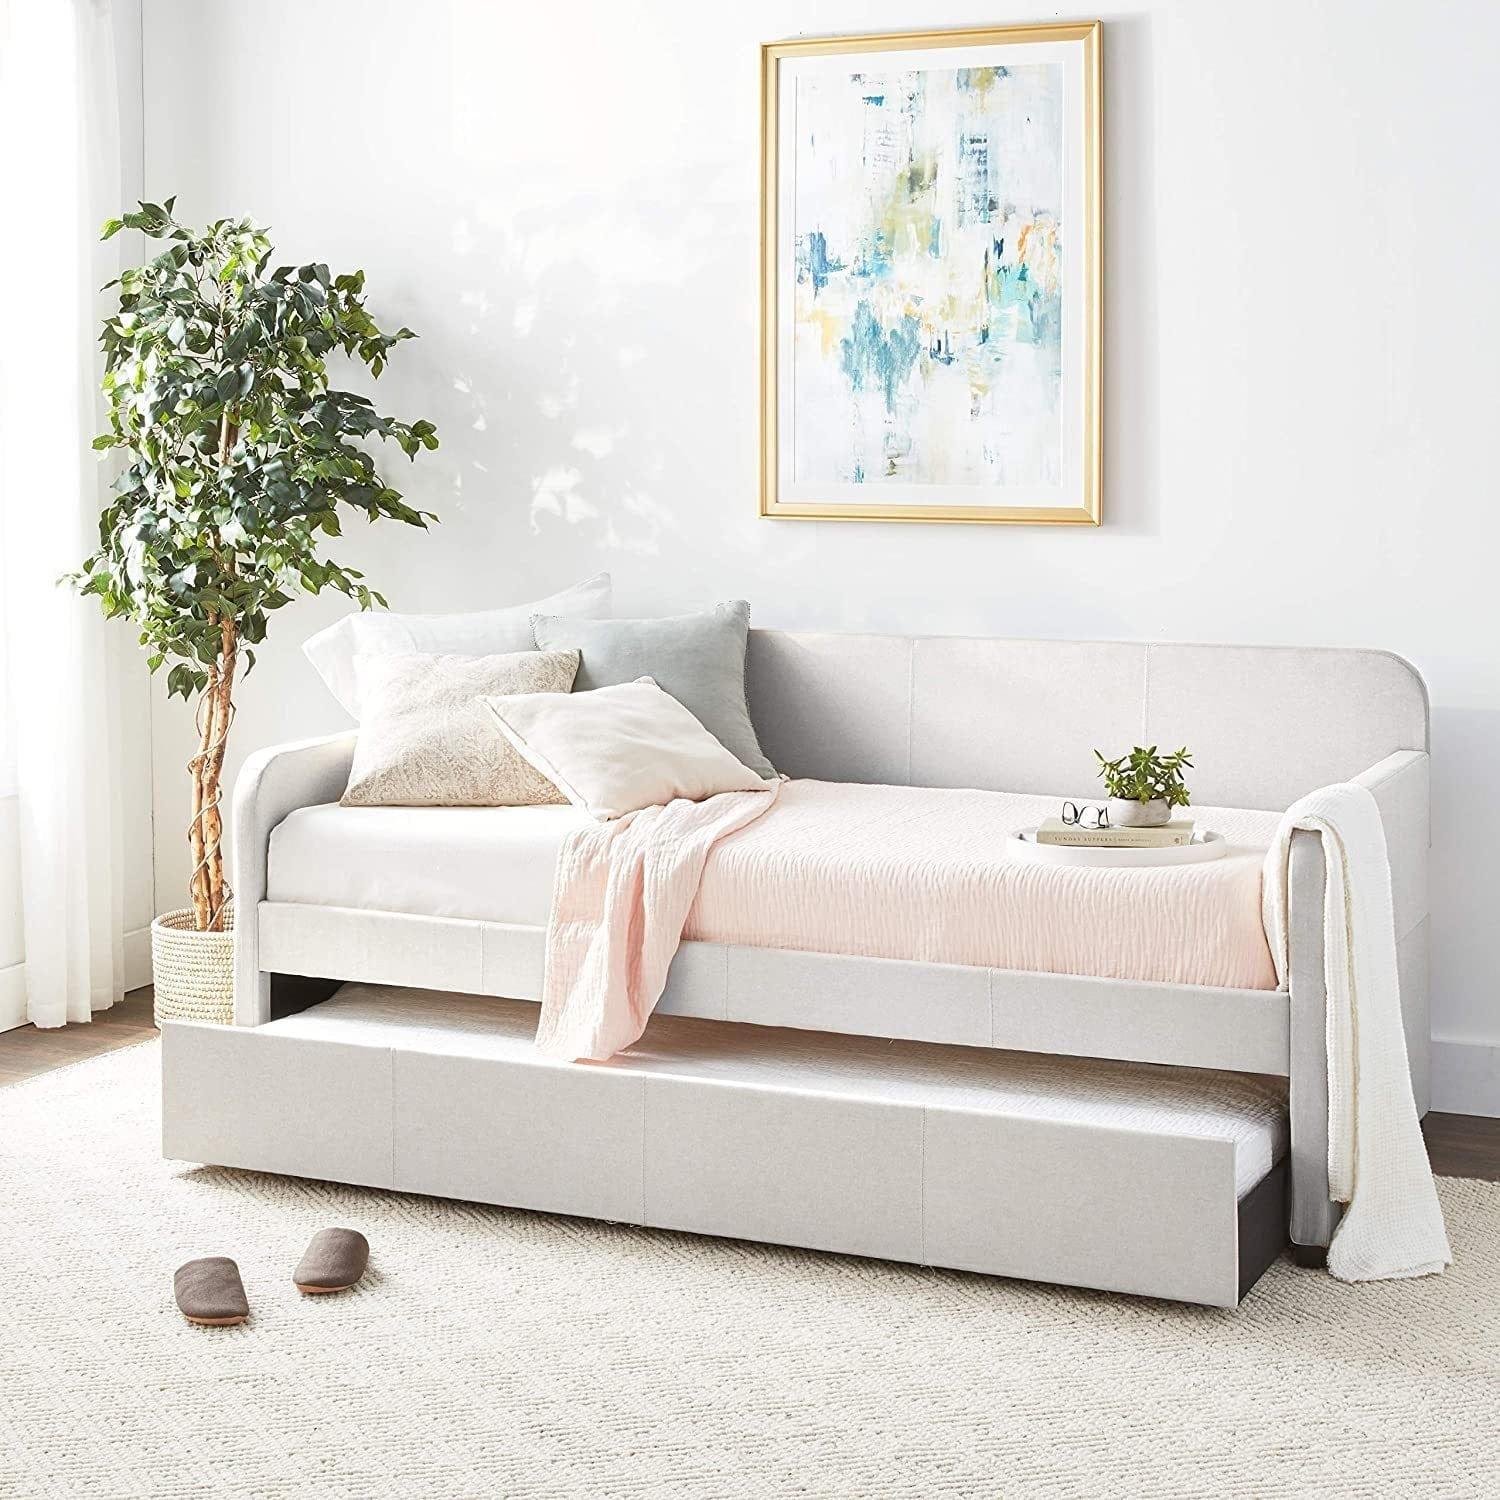 Shop ACME Jagger Daybed & Trundle (Twin Size) in Fog Fabric 39190 Mademoiselle Home Decor